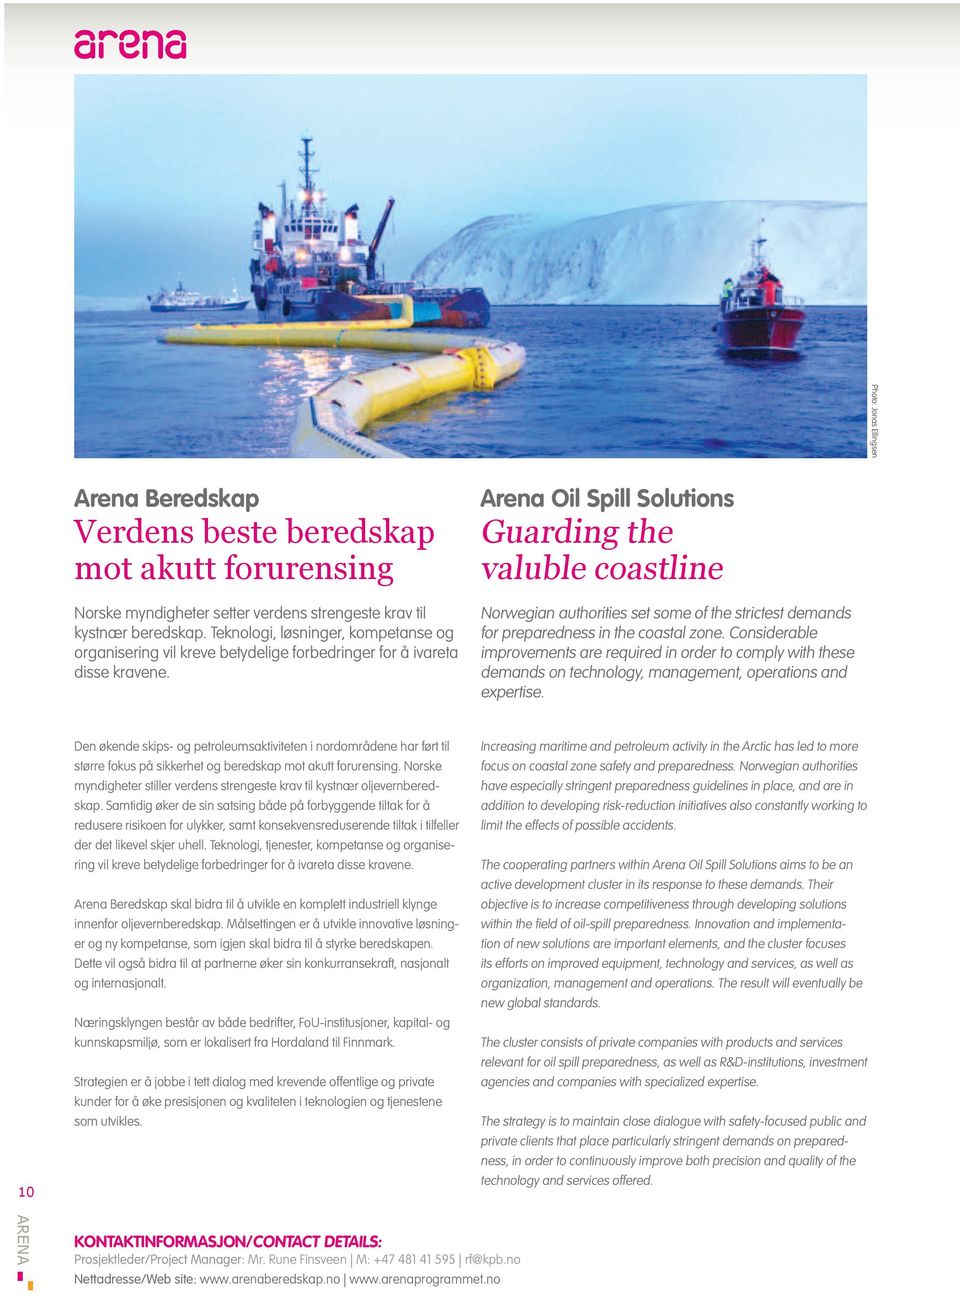 Arena Oil Spill Solutions Guarding the valuble coastline Norwegian authorities set some of the strictest demands for preparedness in the coastal zone.